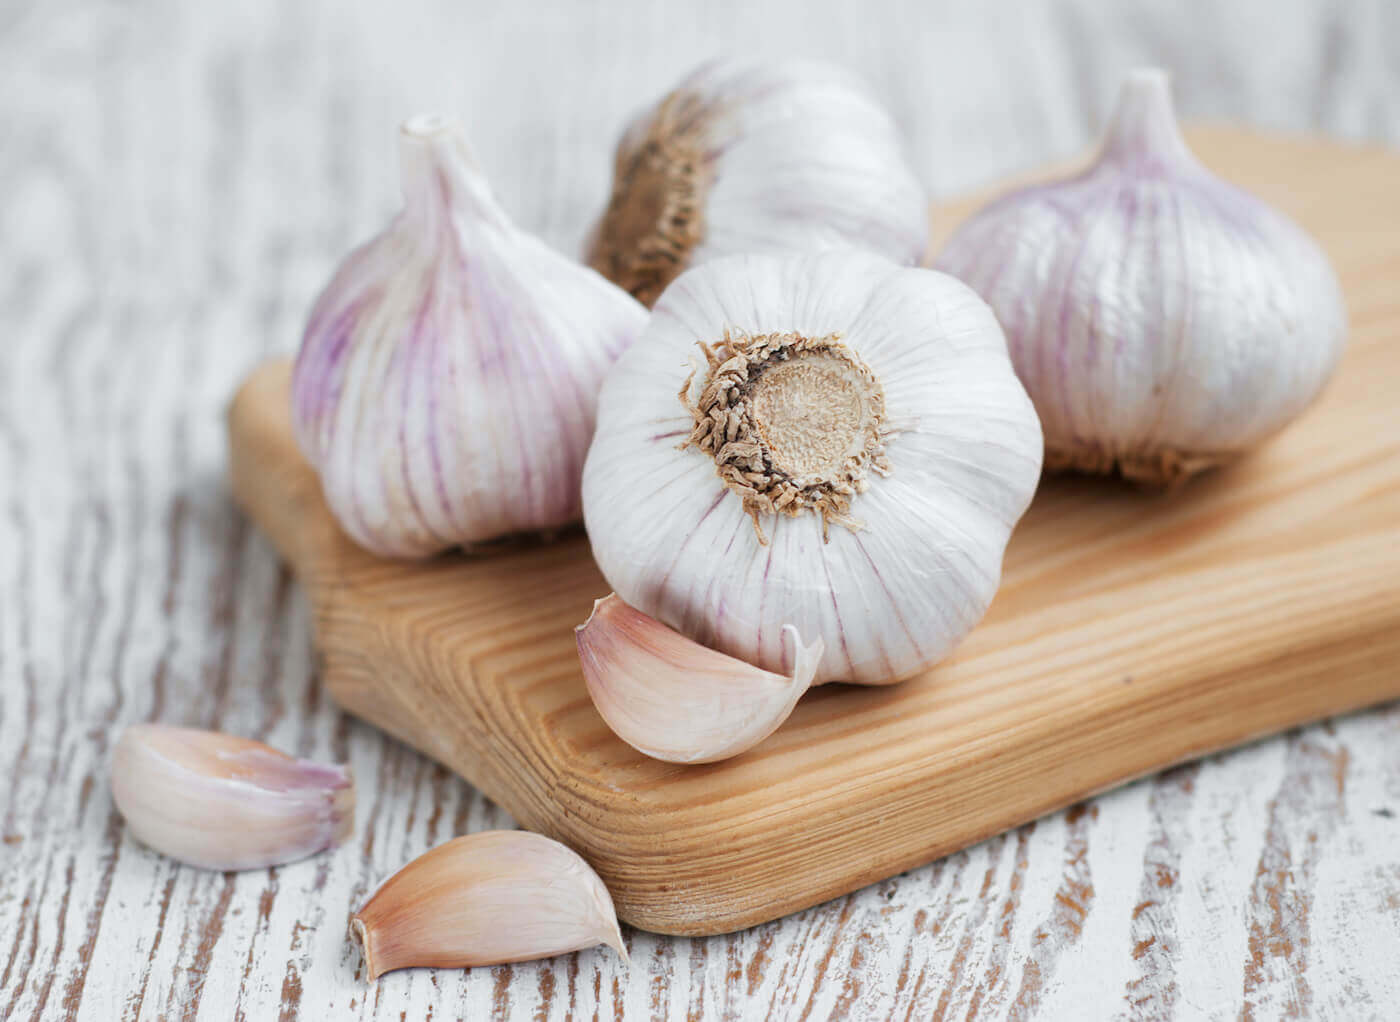 Minced Garlic Vs. Garlic Powder: What’s The Difference?